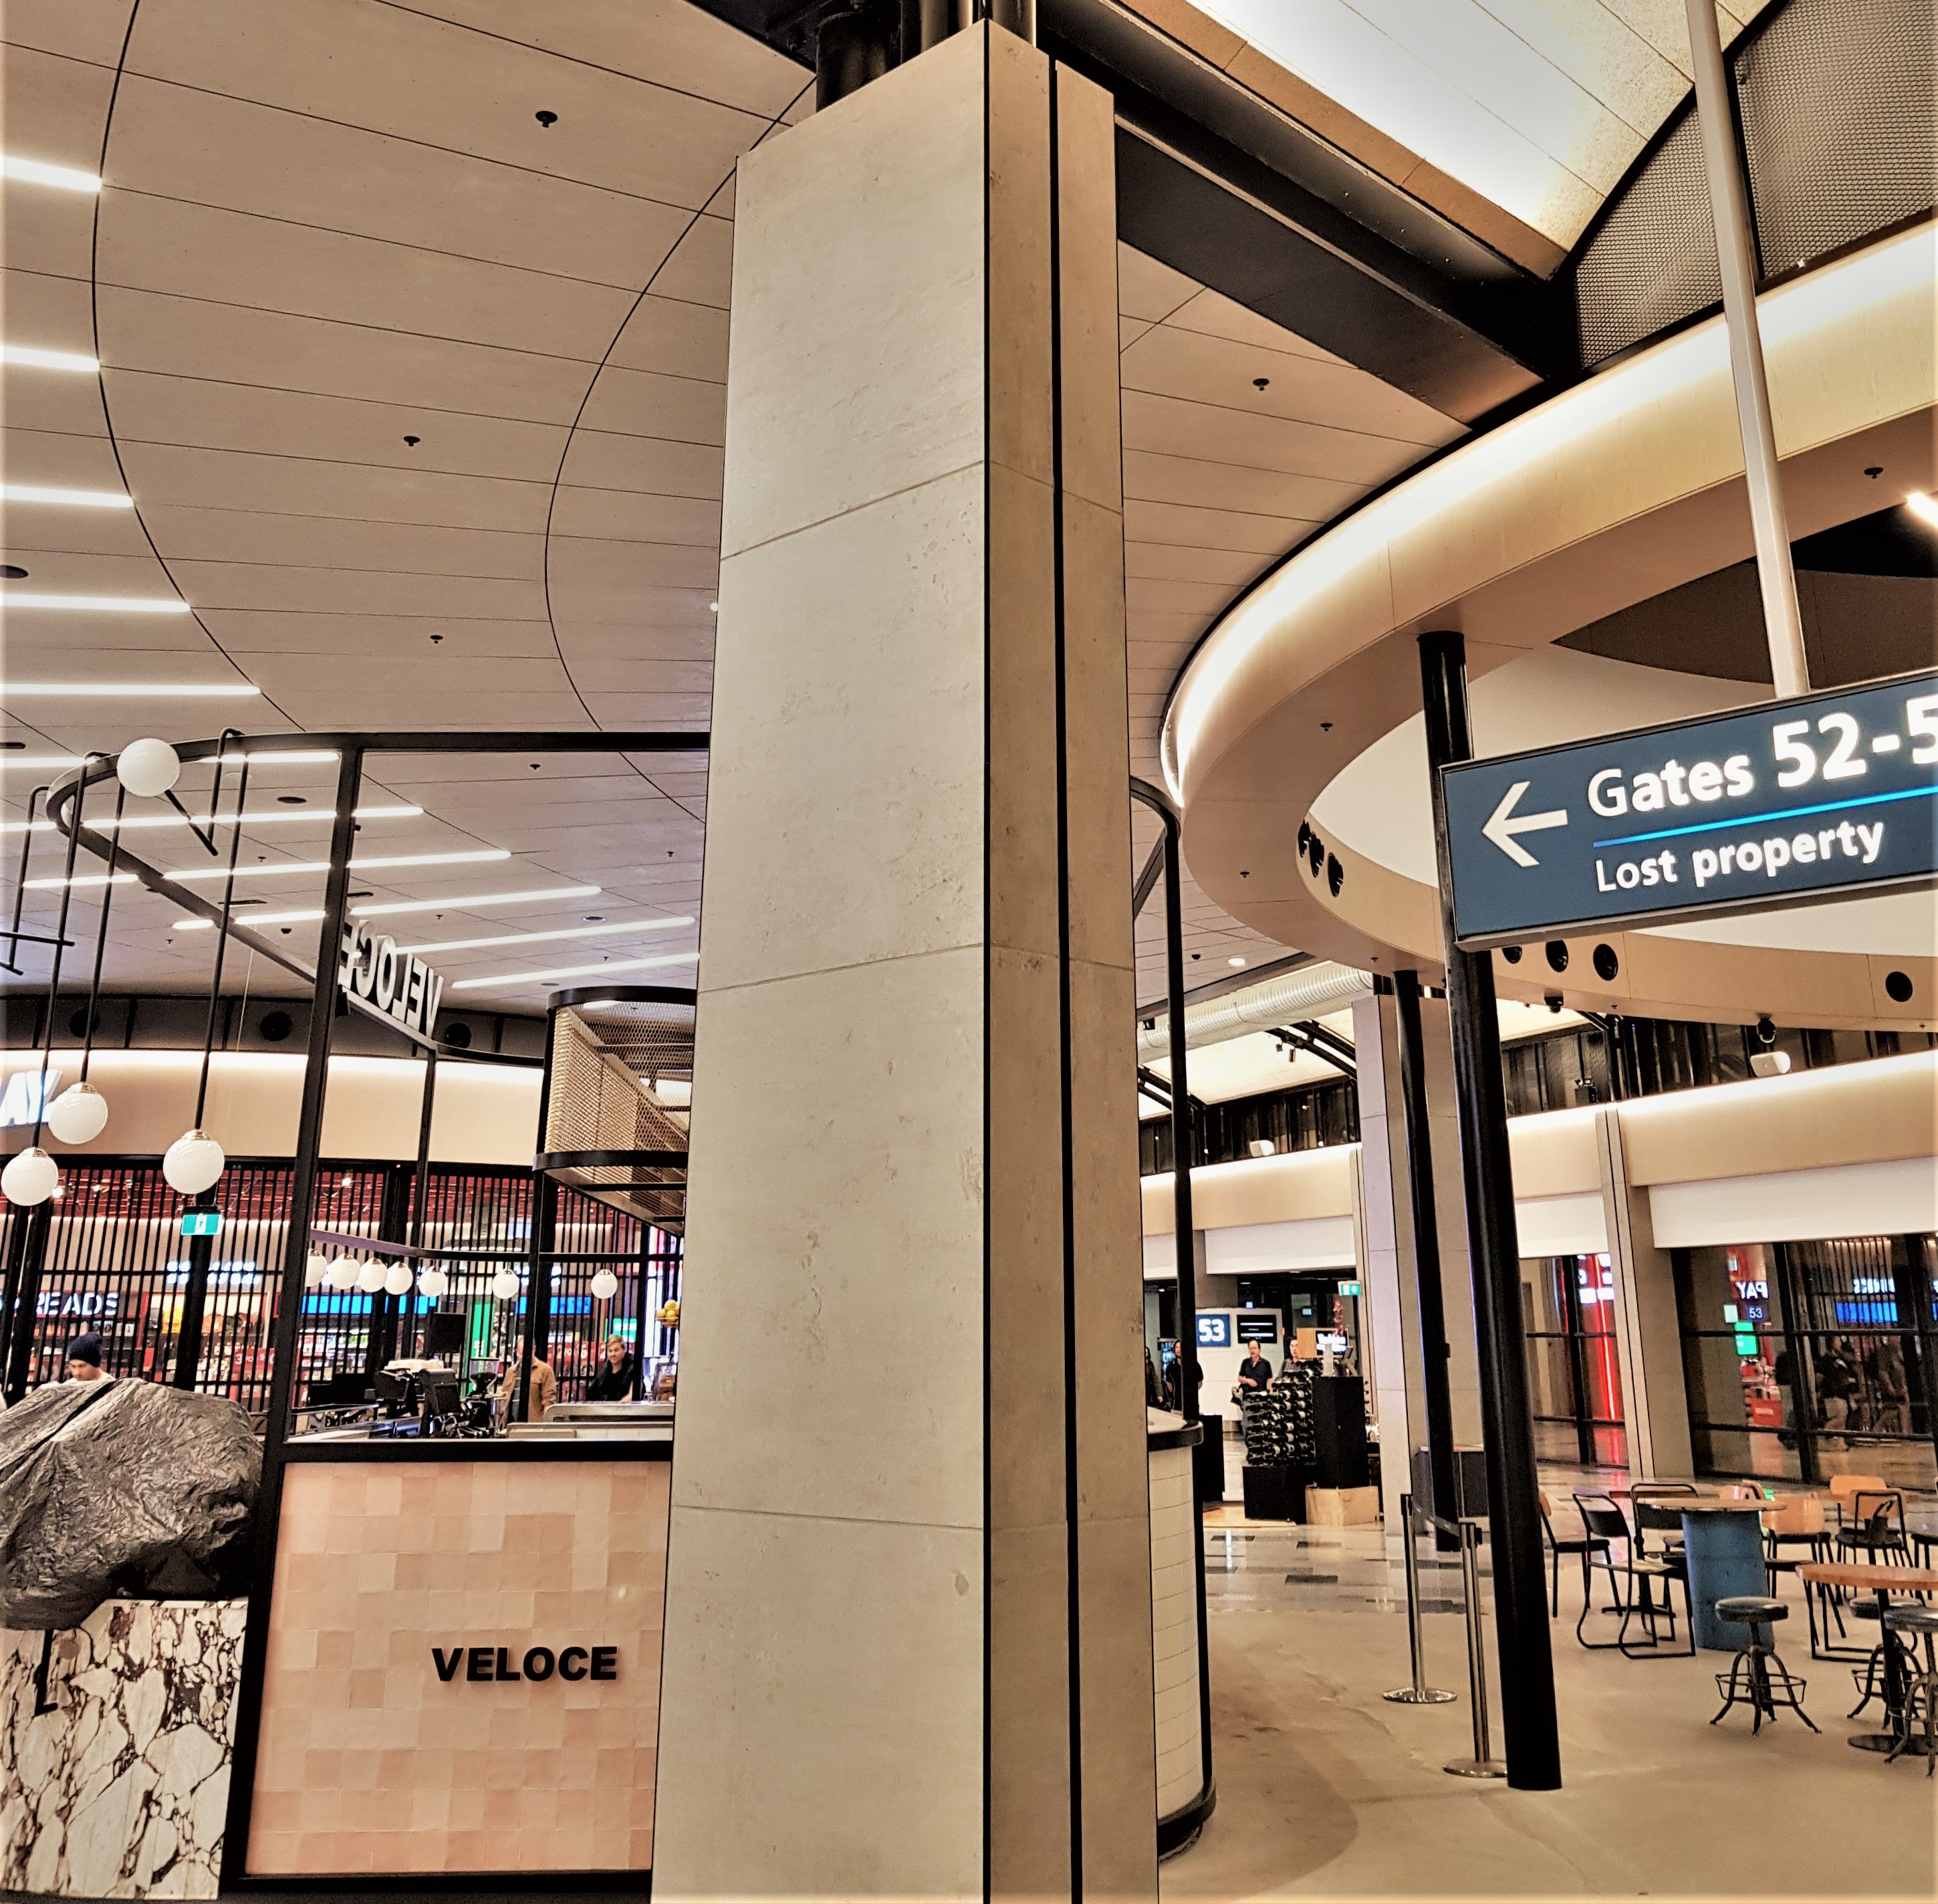 Birdsmouth tile trims by Amark Group at Sydney T2 Terminal